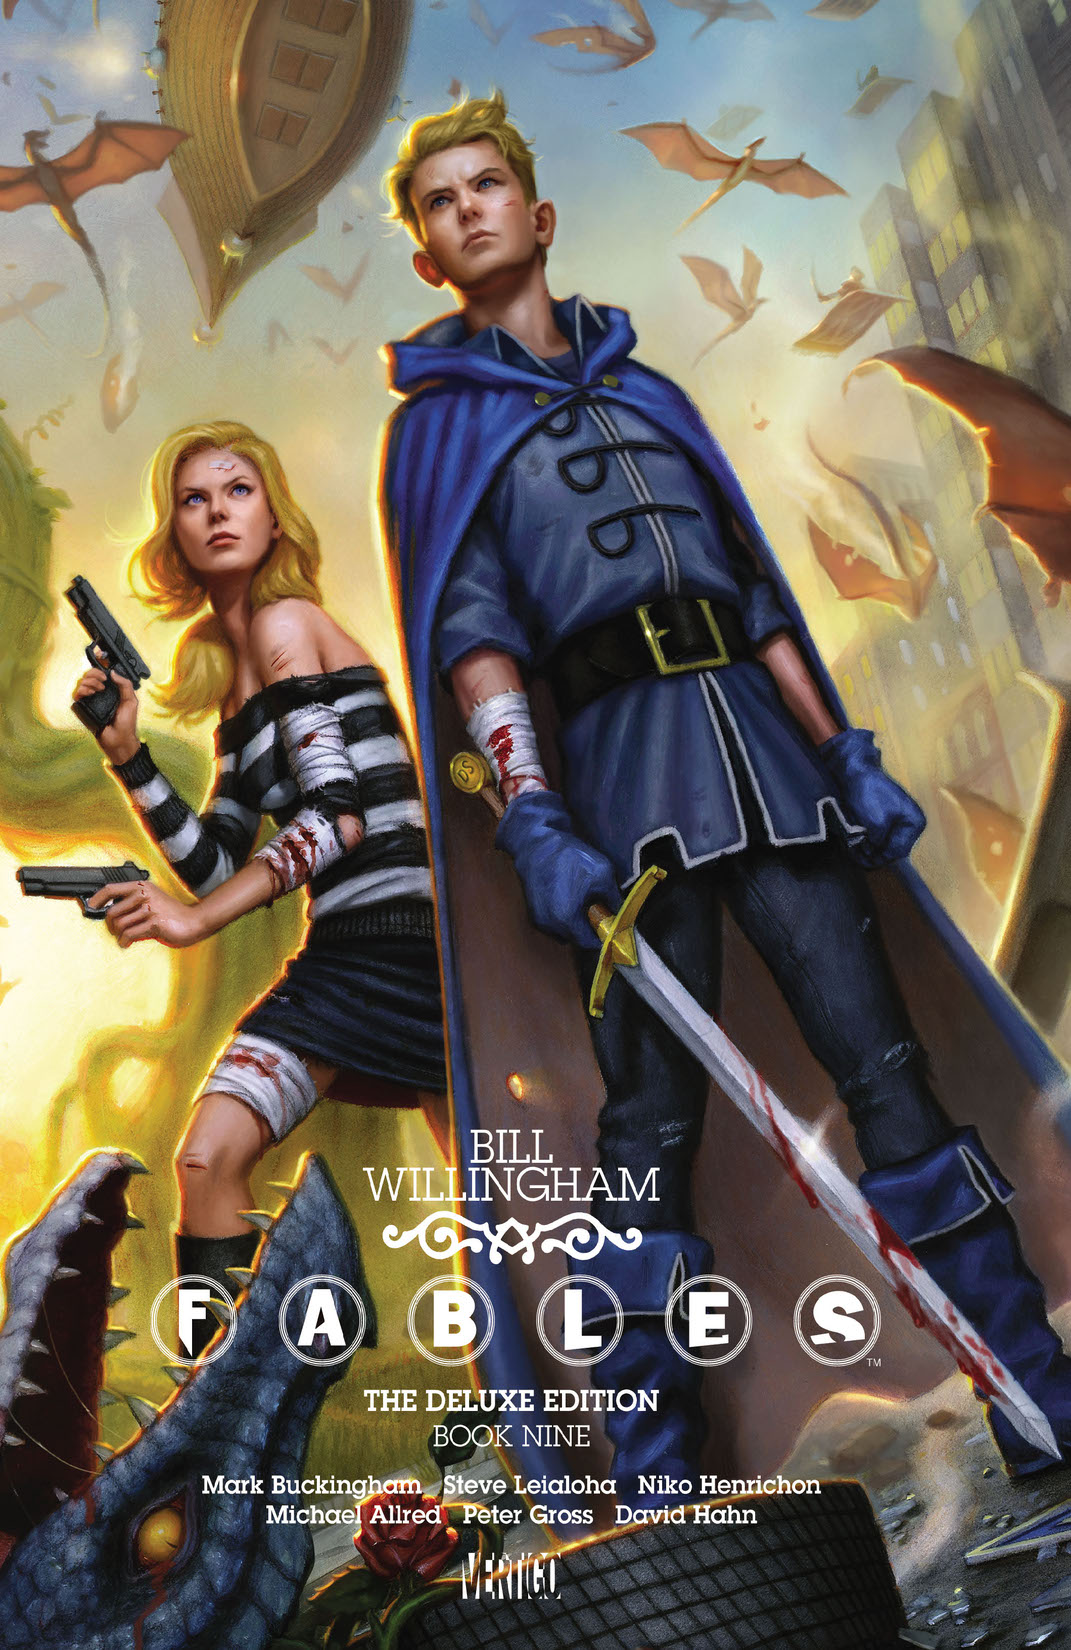 Fables: The Deluxe Edition Book Nine preview images